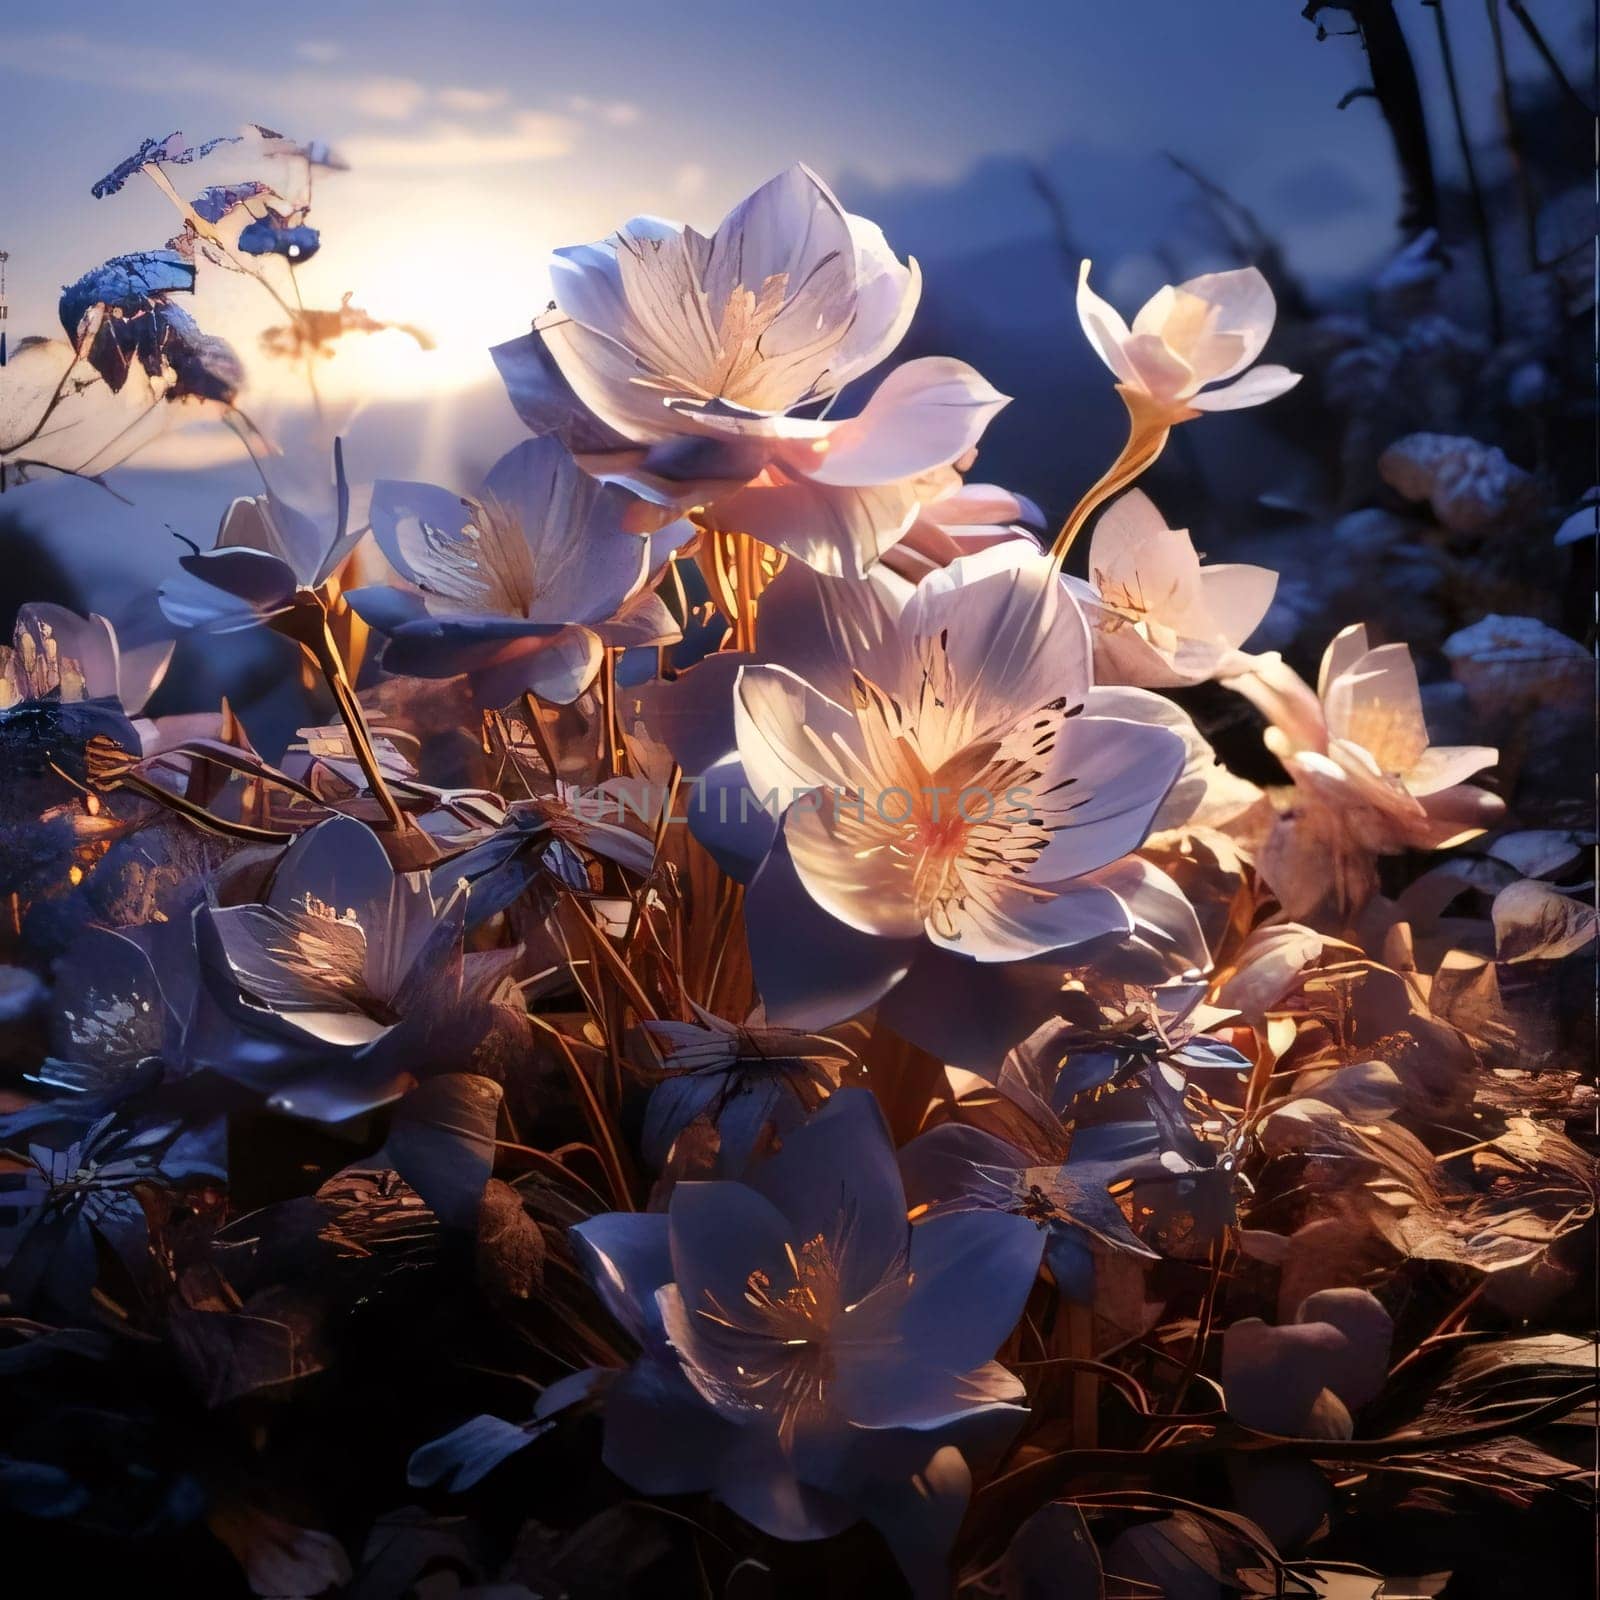 White flowers in the sunset rays, dark background. Flowering flowers, a symbol of spring, new life. A joyful time of nature waking up to life.